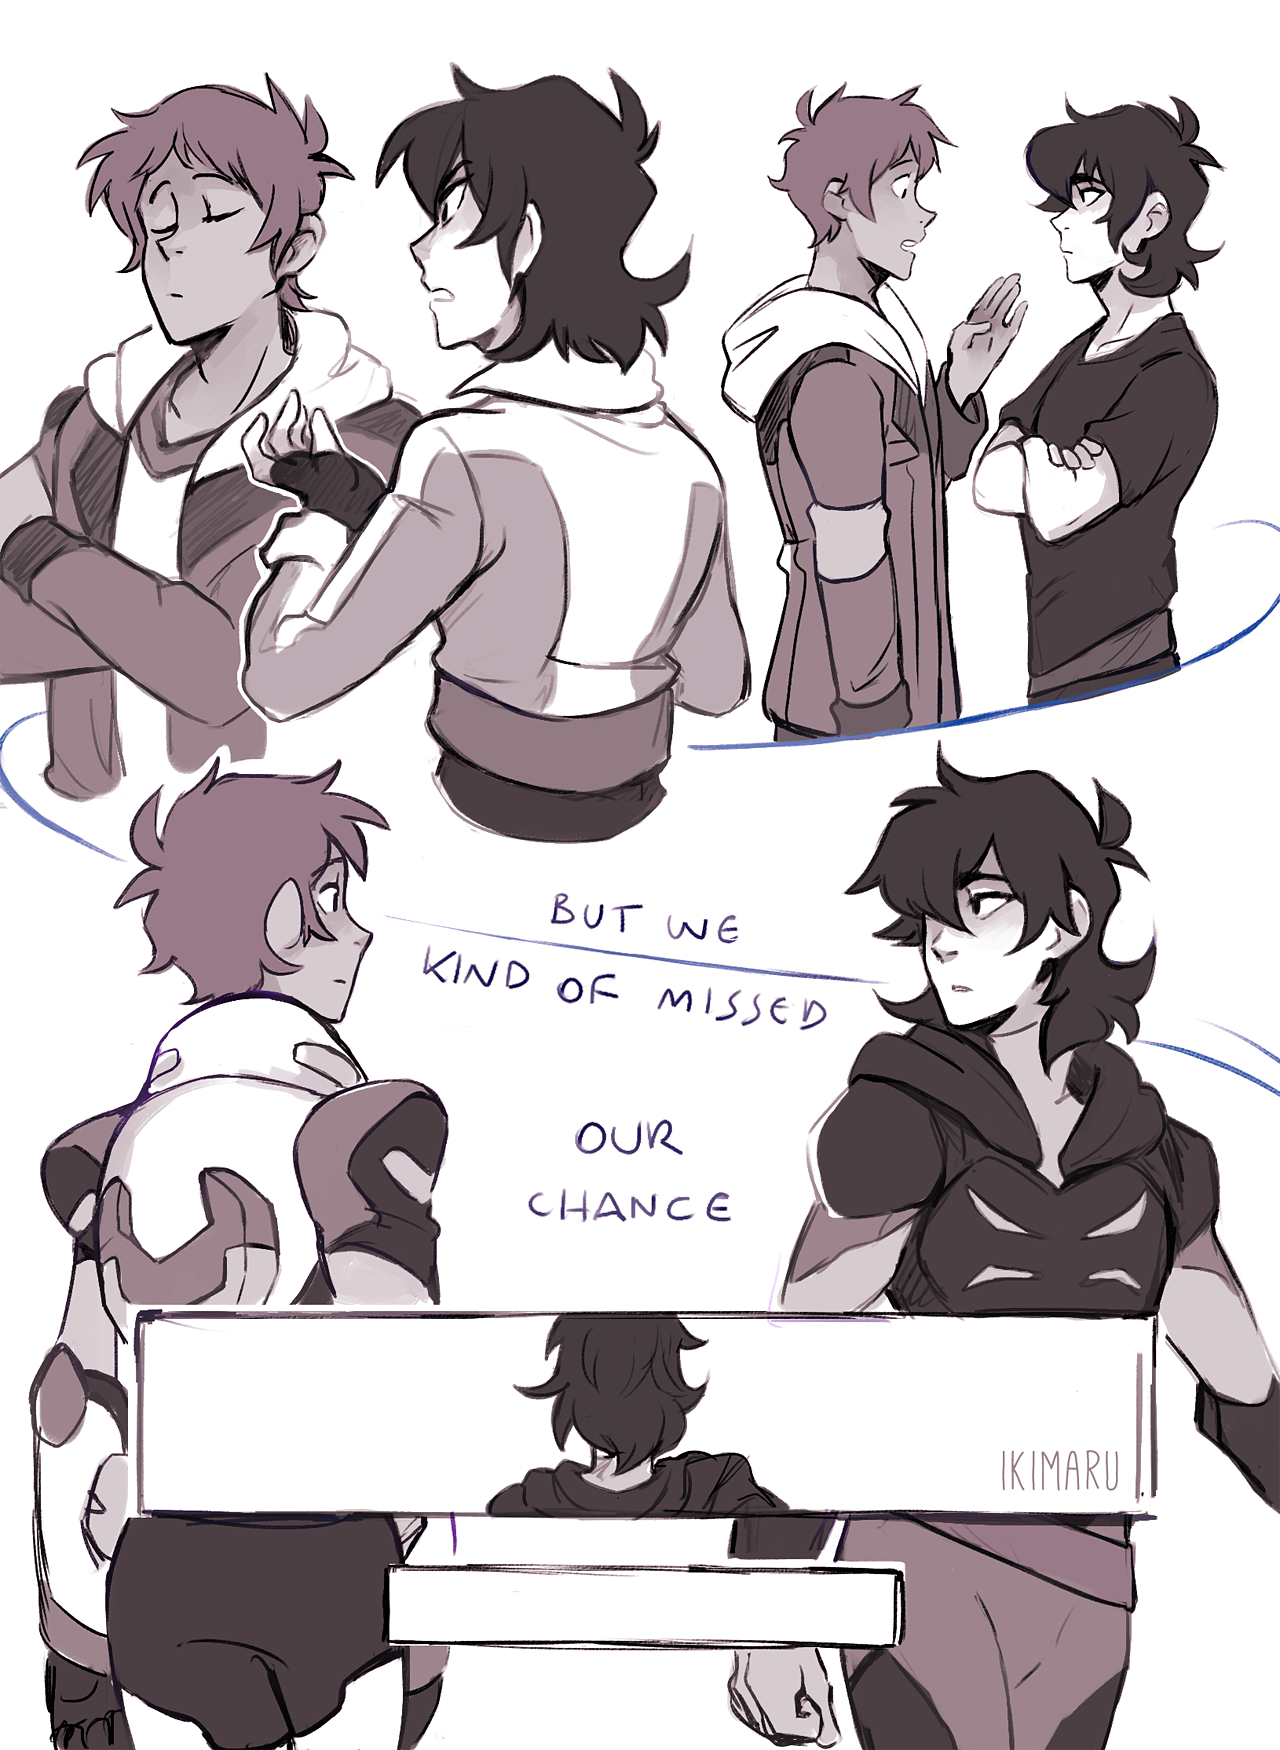 ikimaru: part 5 in which Lance is still thinking about it and Rachel has no time